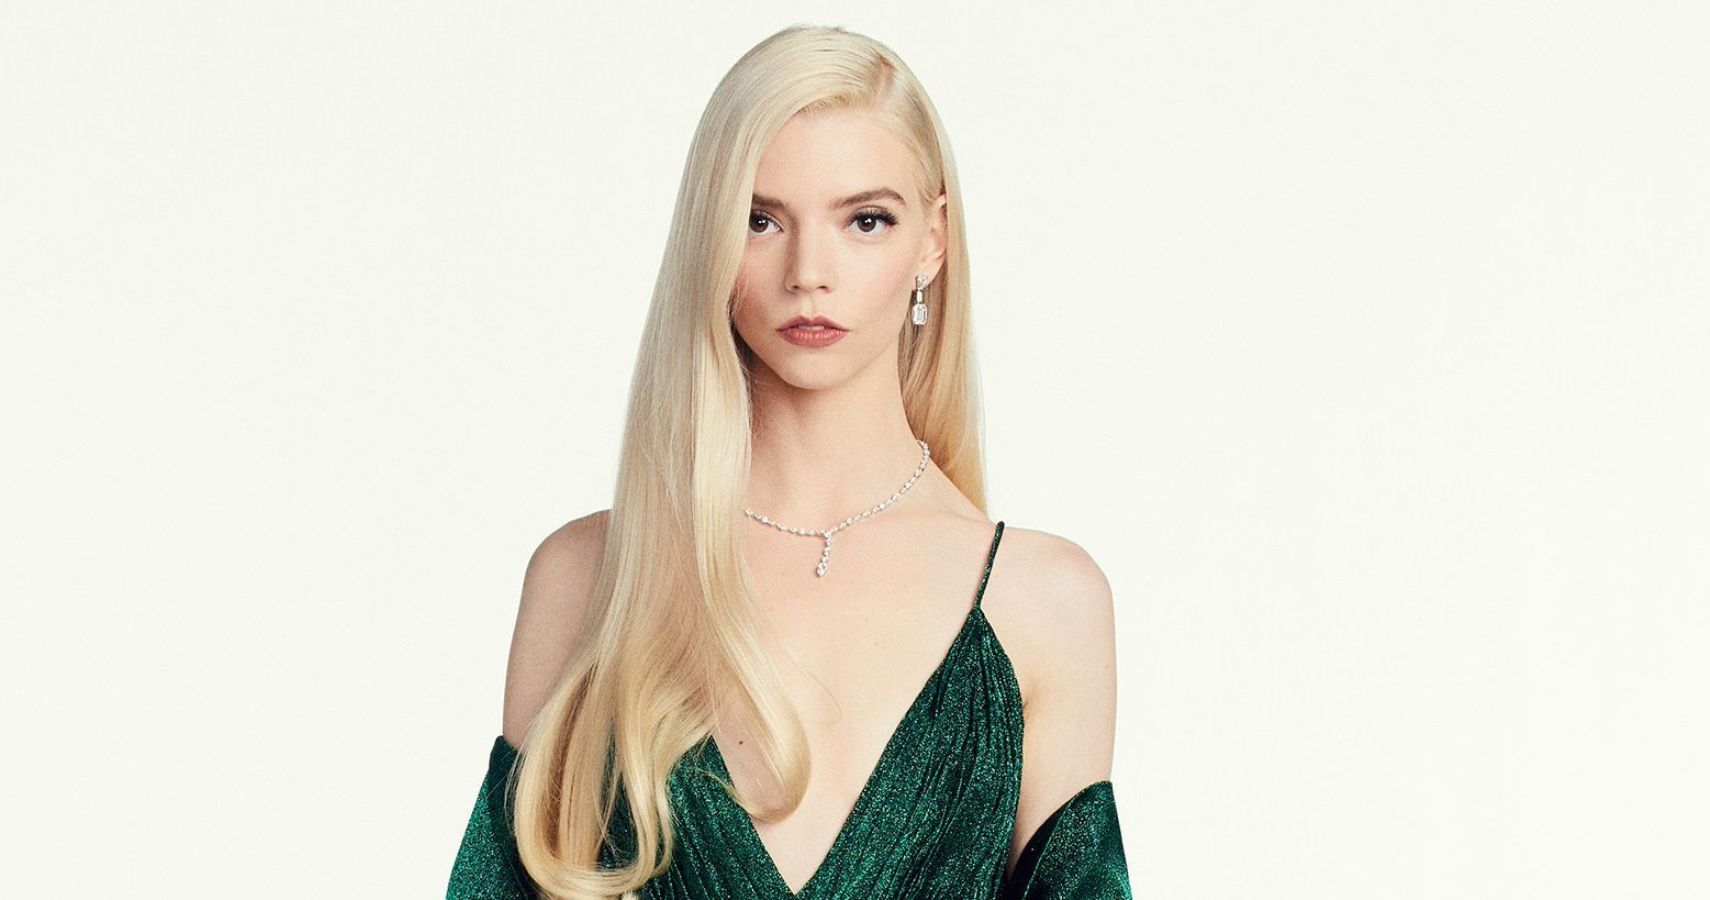 Anya Taylor-Joy wearing an emerald gown at the Golden Globes